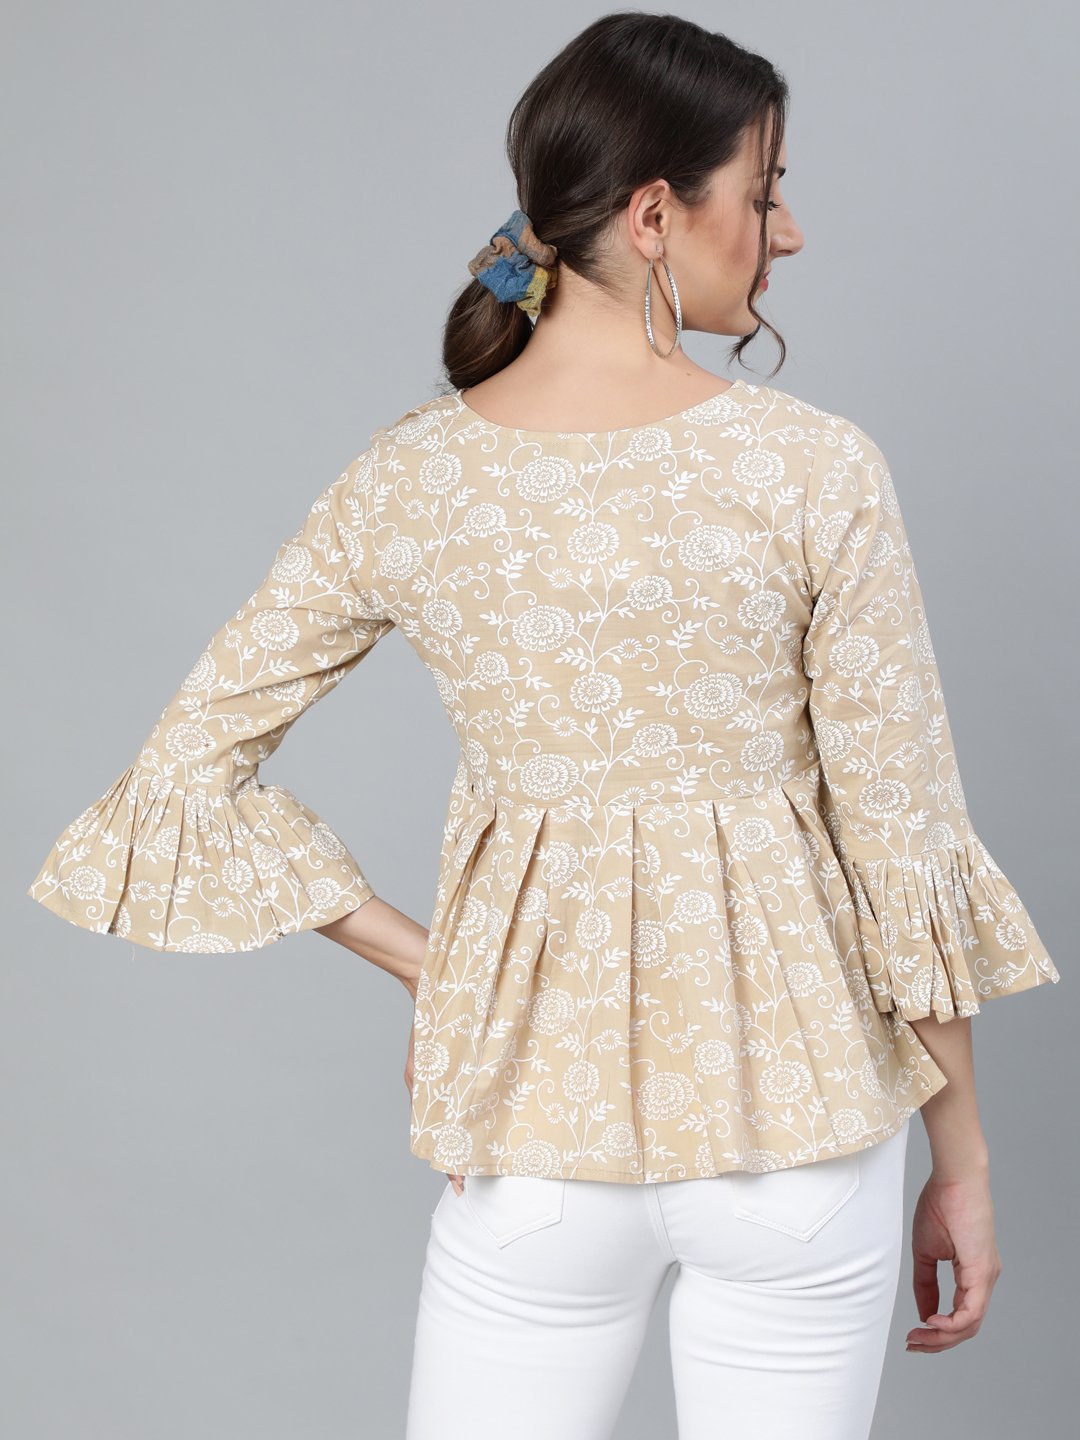 Women's Womenbeige & Off-White Floral Printed Top With Round Neck & Three Quarter Sleeves - Nayo Clothing